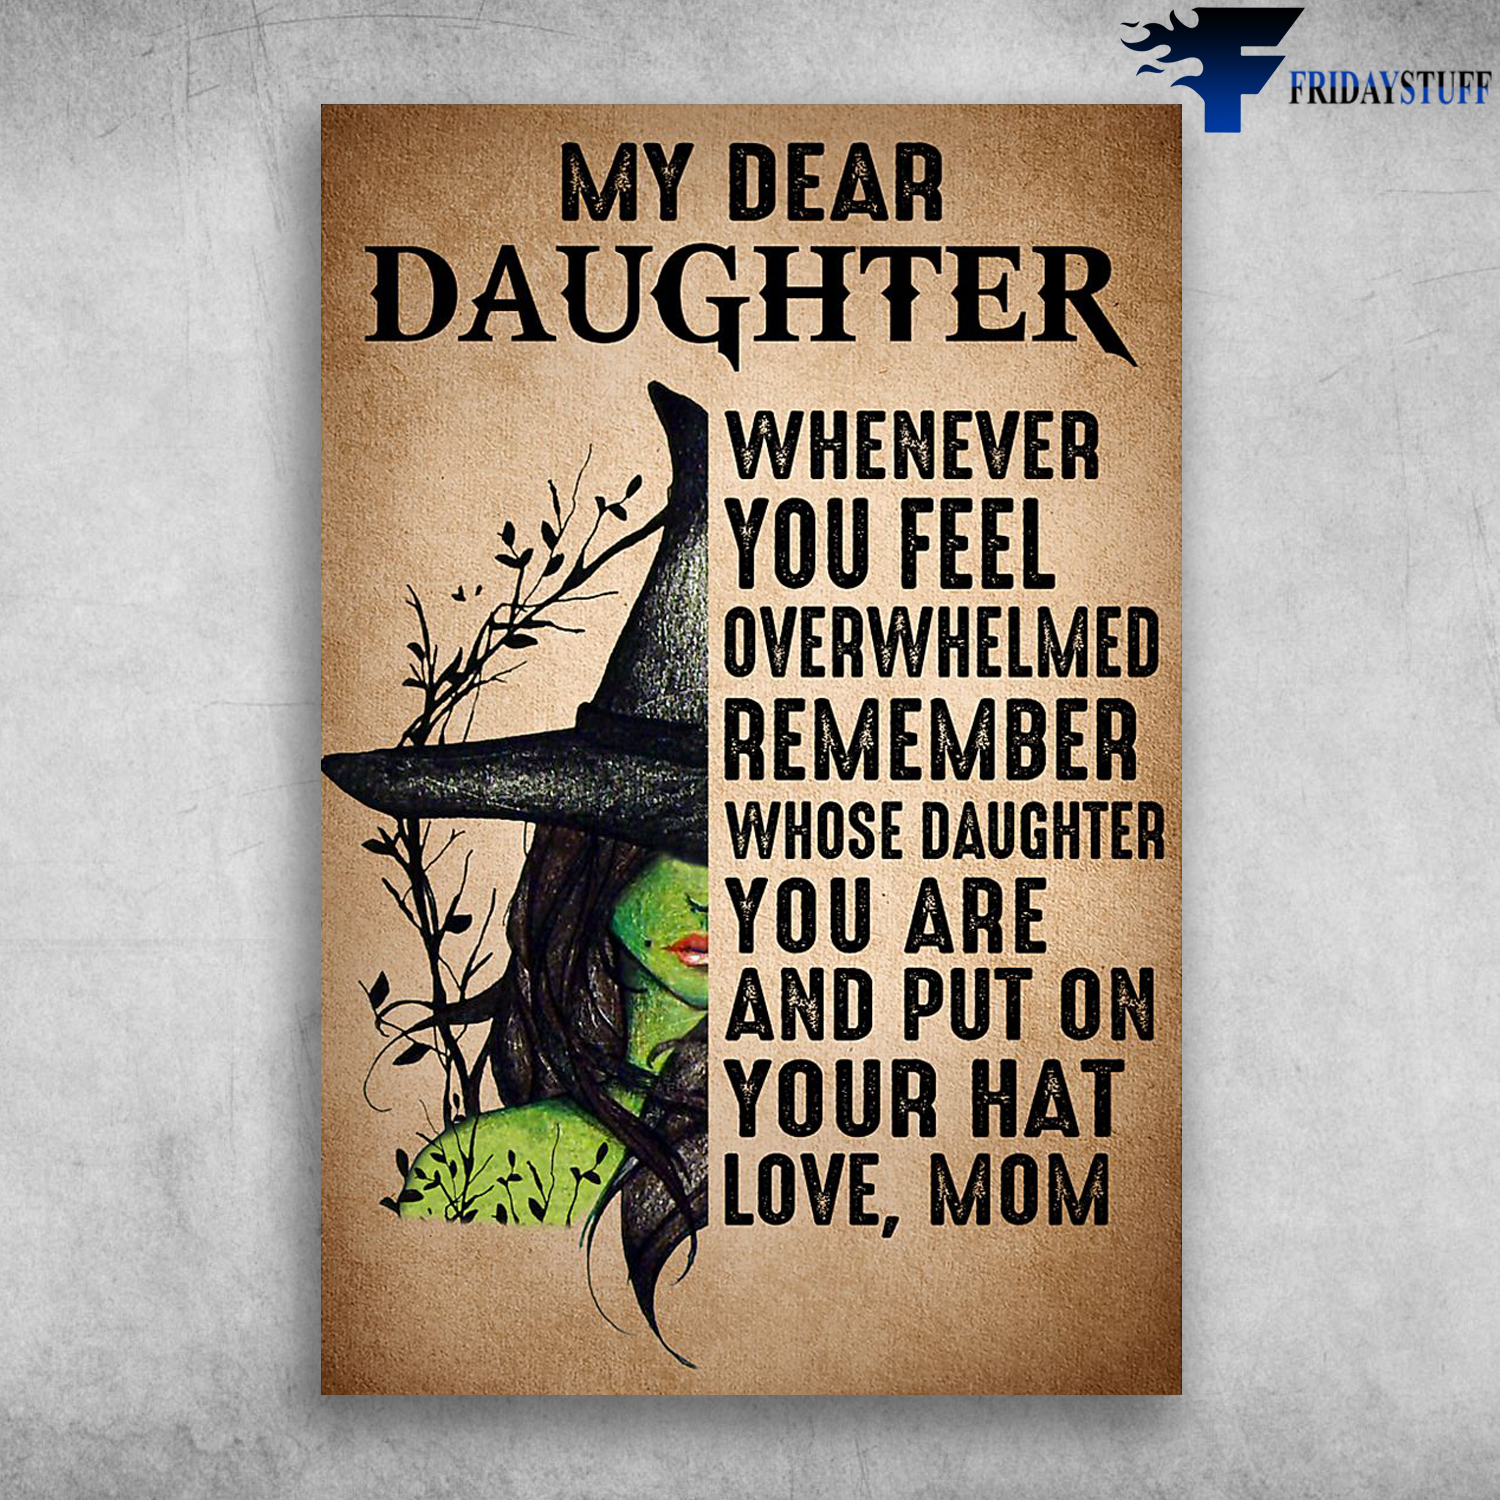 My Dear Daughter Whenever You Feel Overwhelmed Remember Whose Daughter